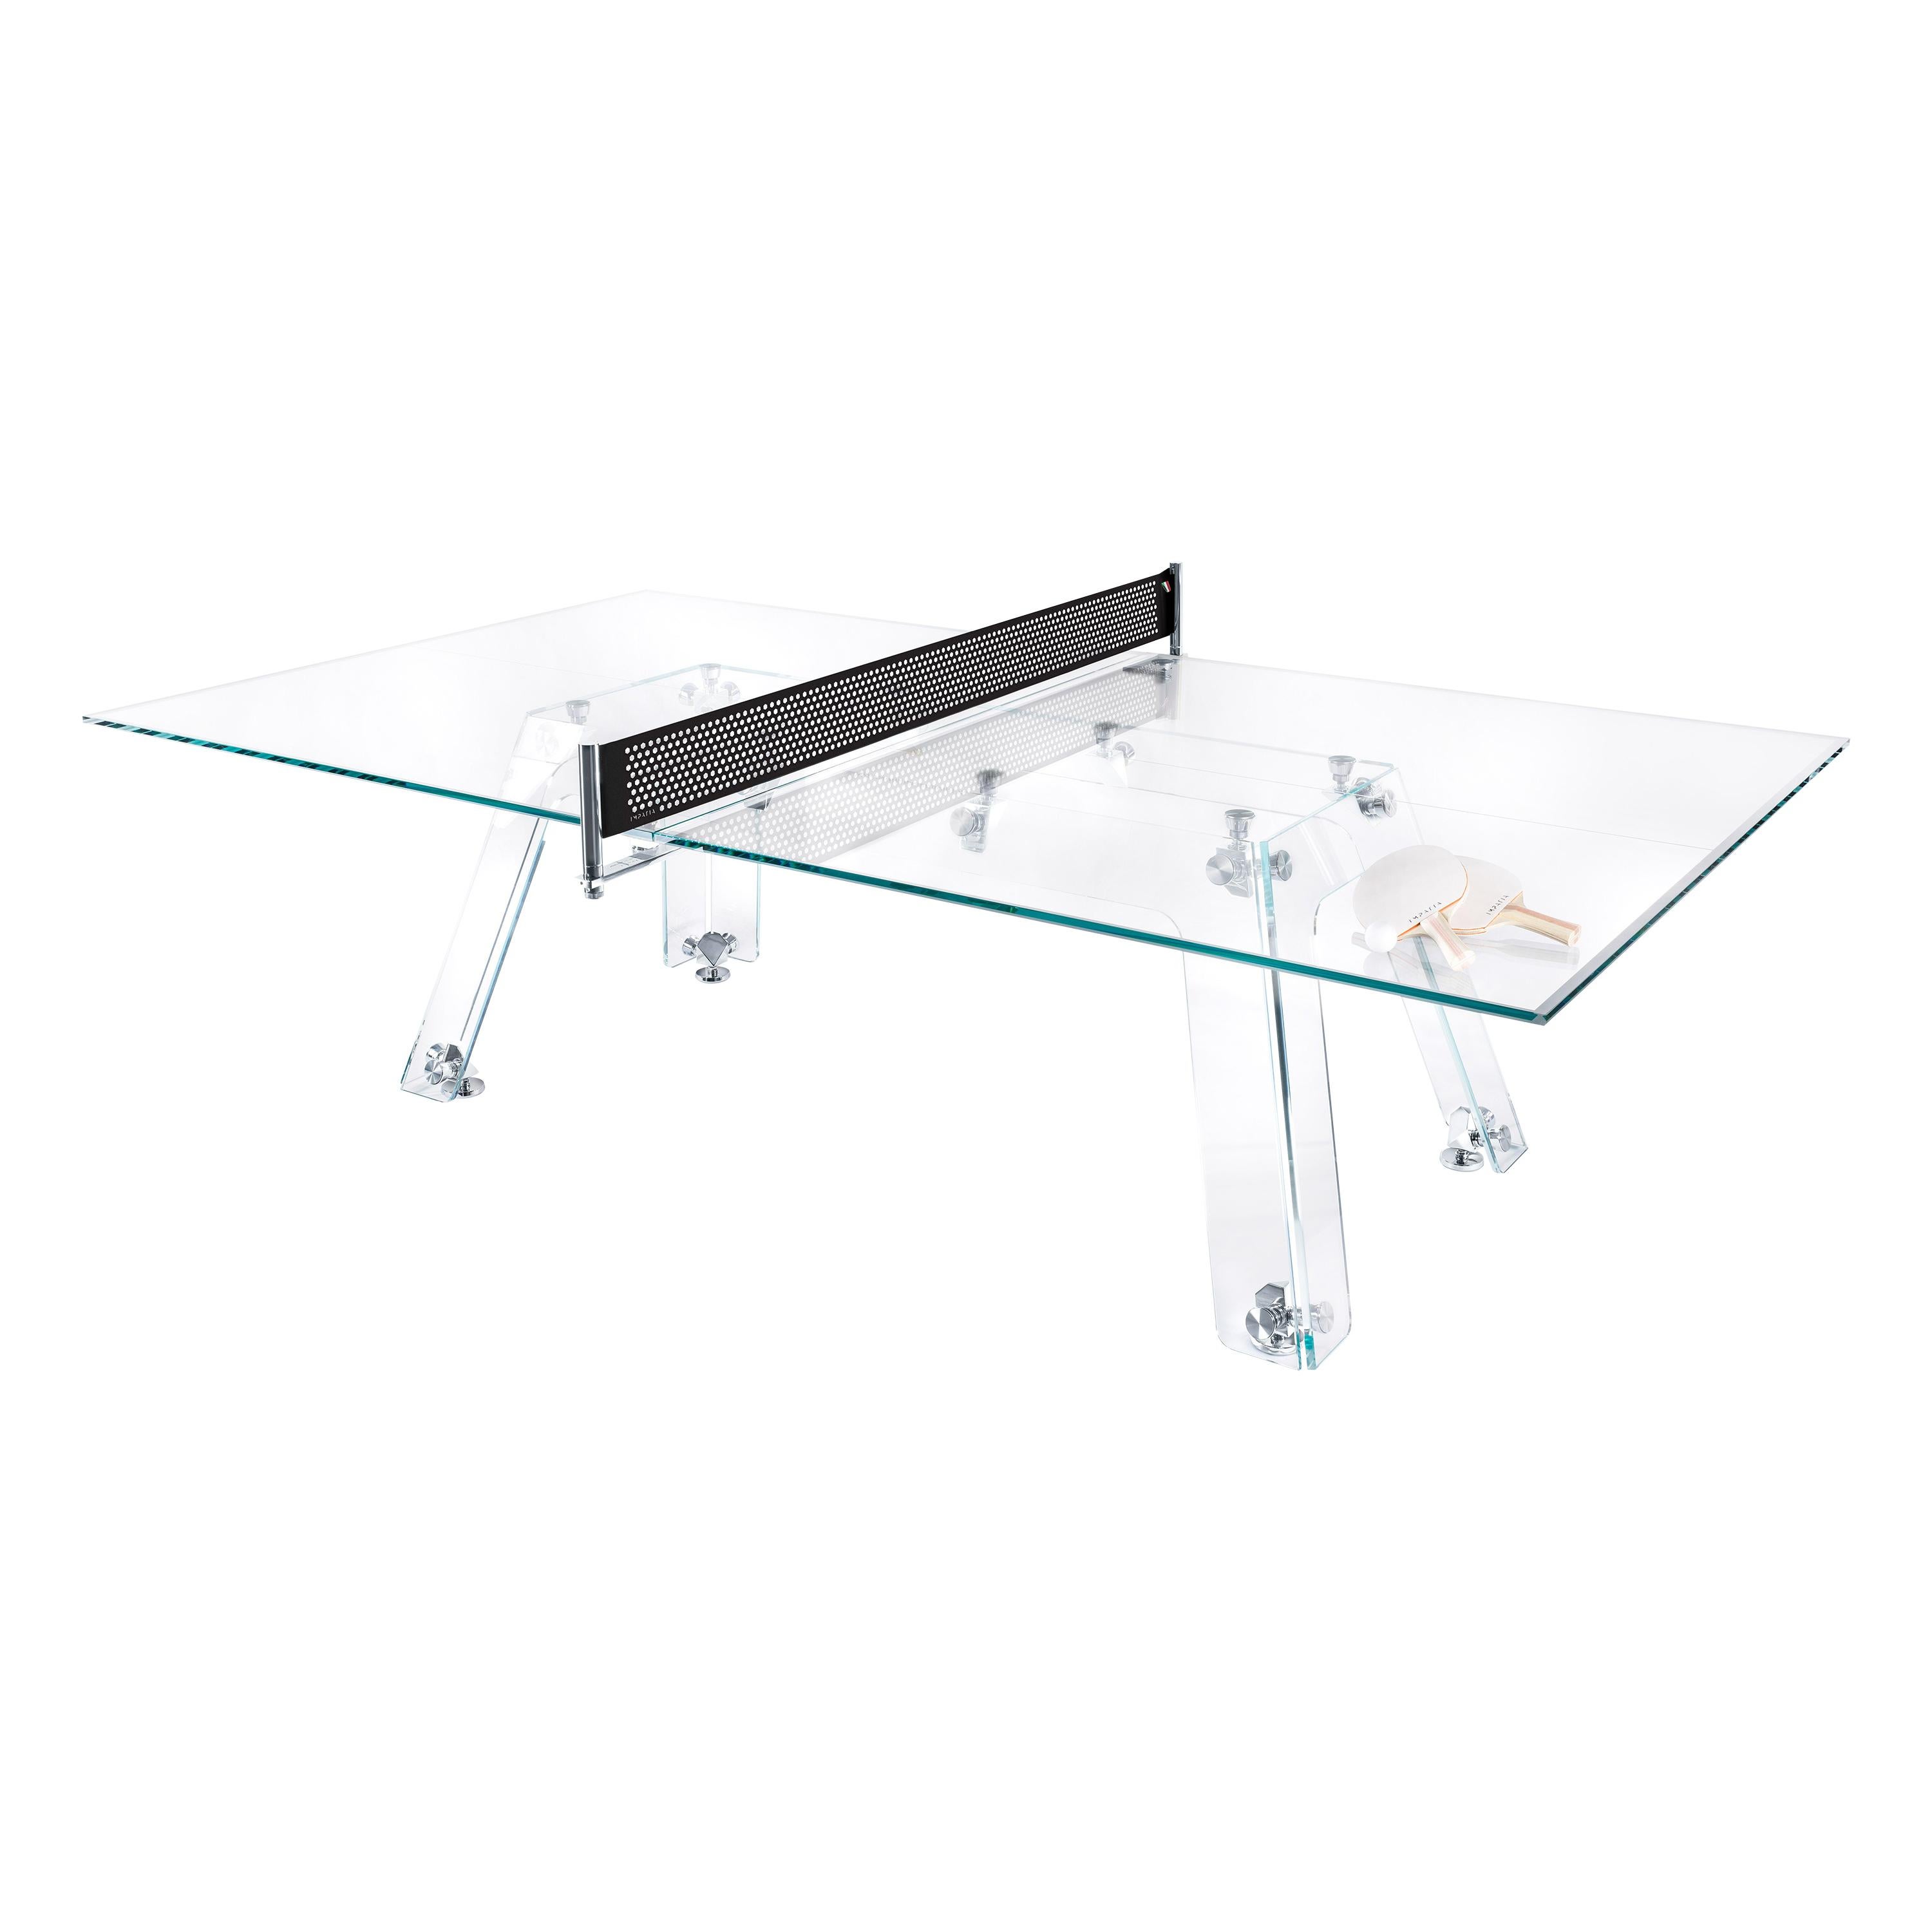 Modern Glass Ping Pong Table With Removable Net by Impatia